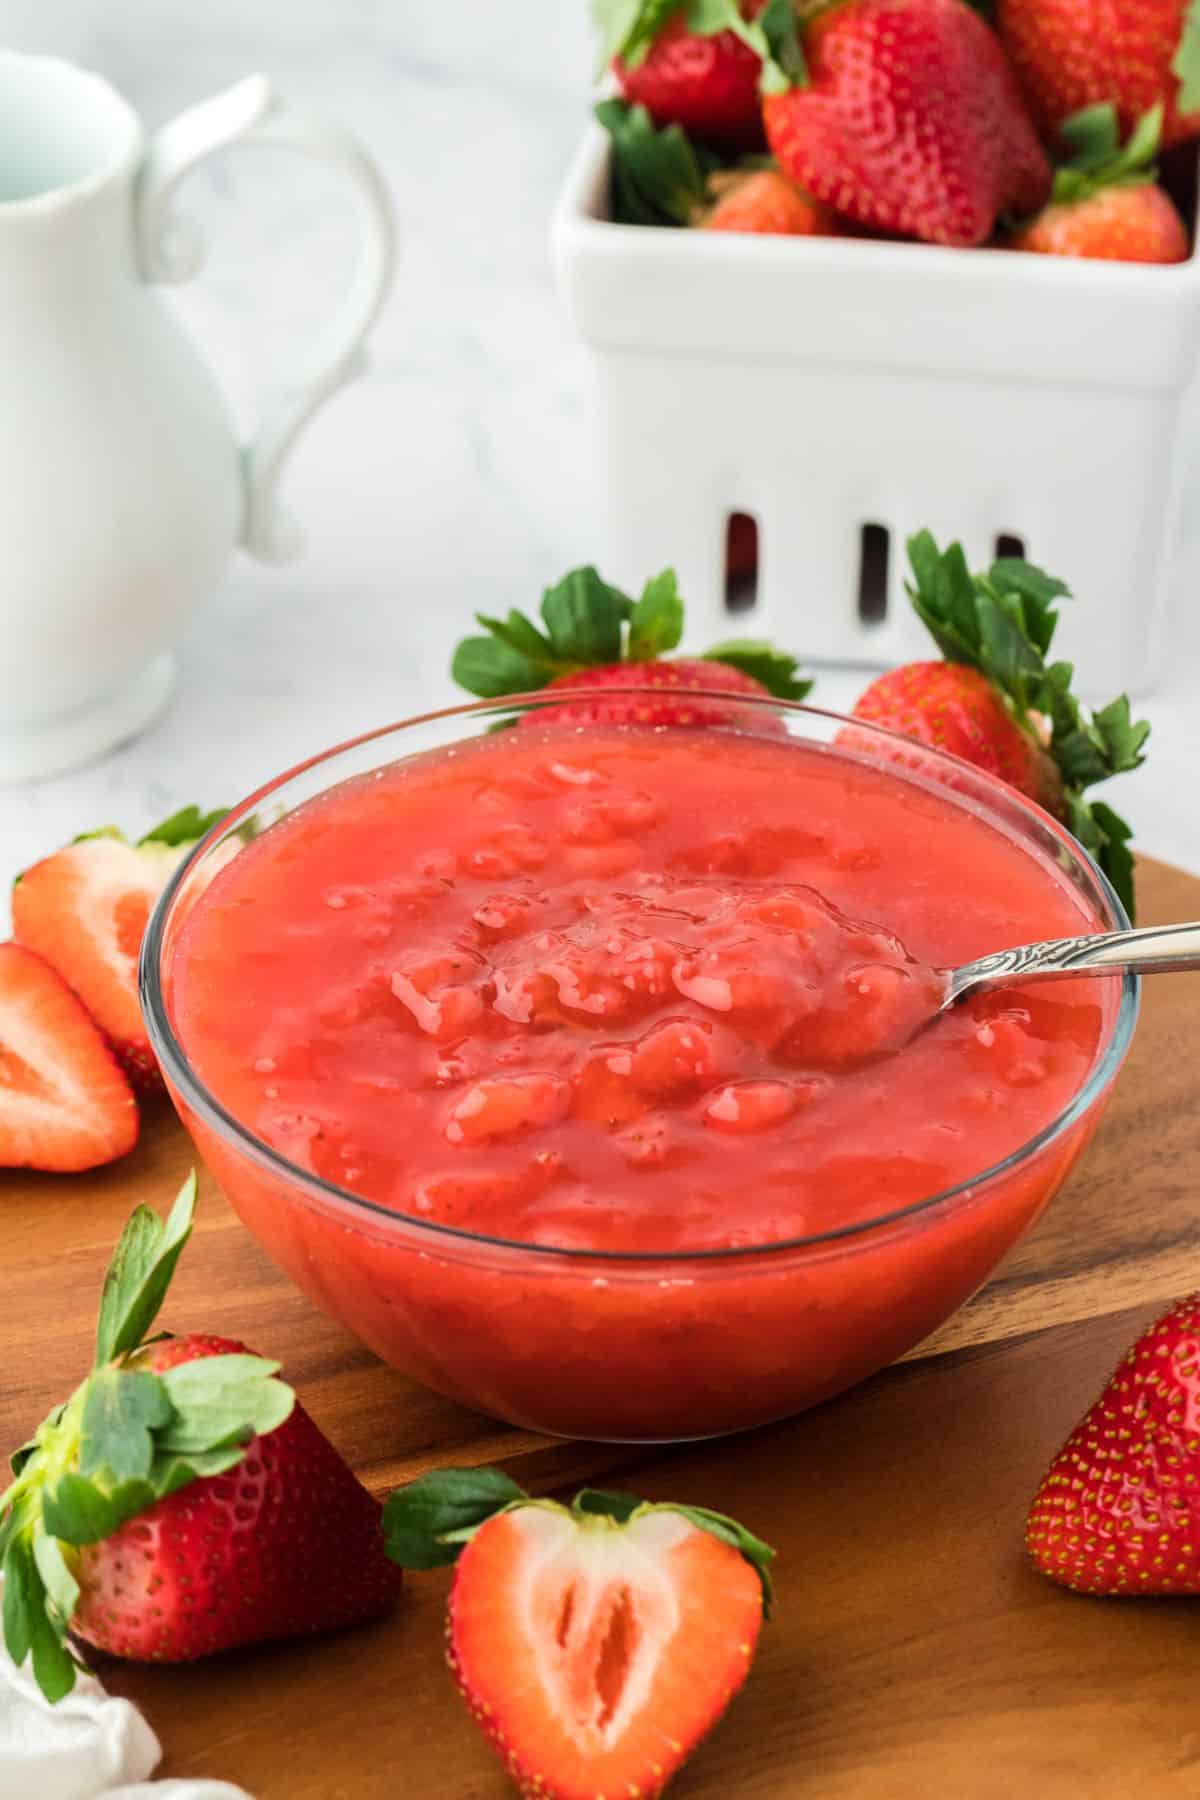 Strawberry sauce in a clear glass bowl with a spoon in it. The bowl is surrounded by whole and halved fresh strawberries on a wooden surface. In the background, there's a white pitcher and a square white bowl with more strawberries